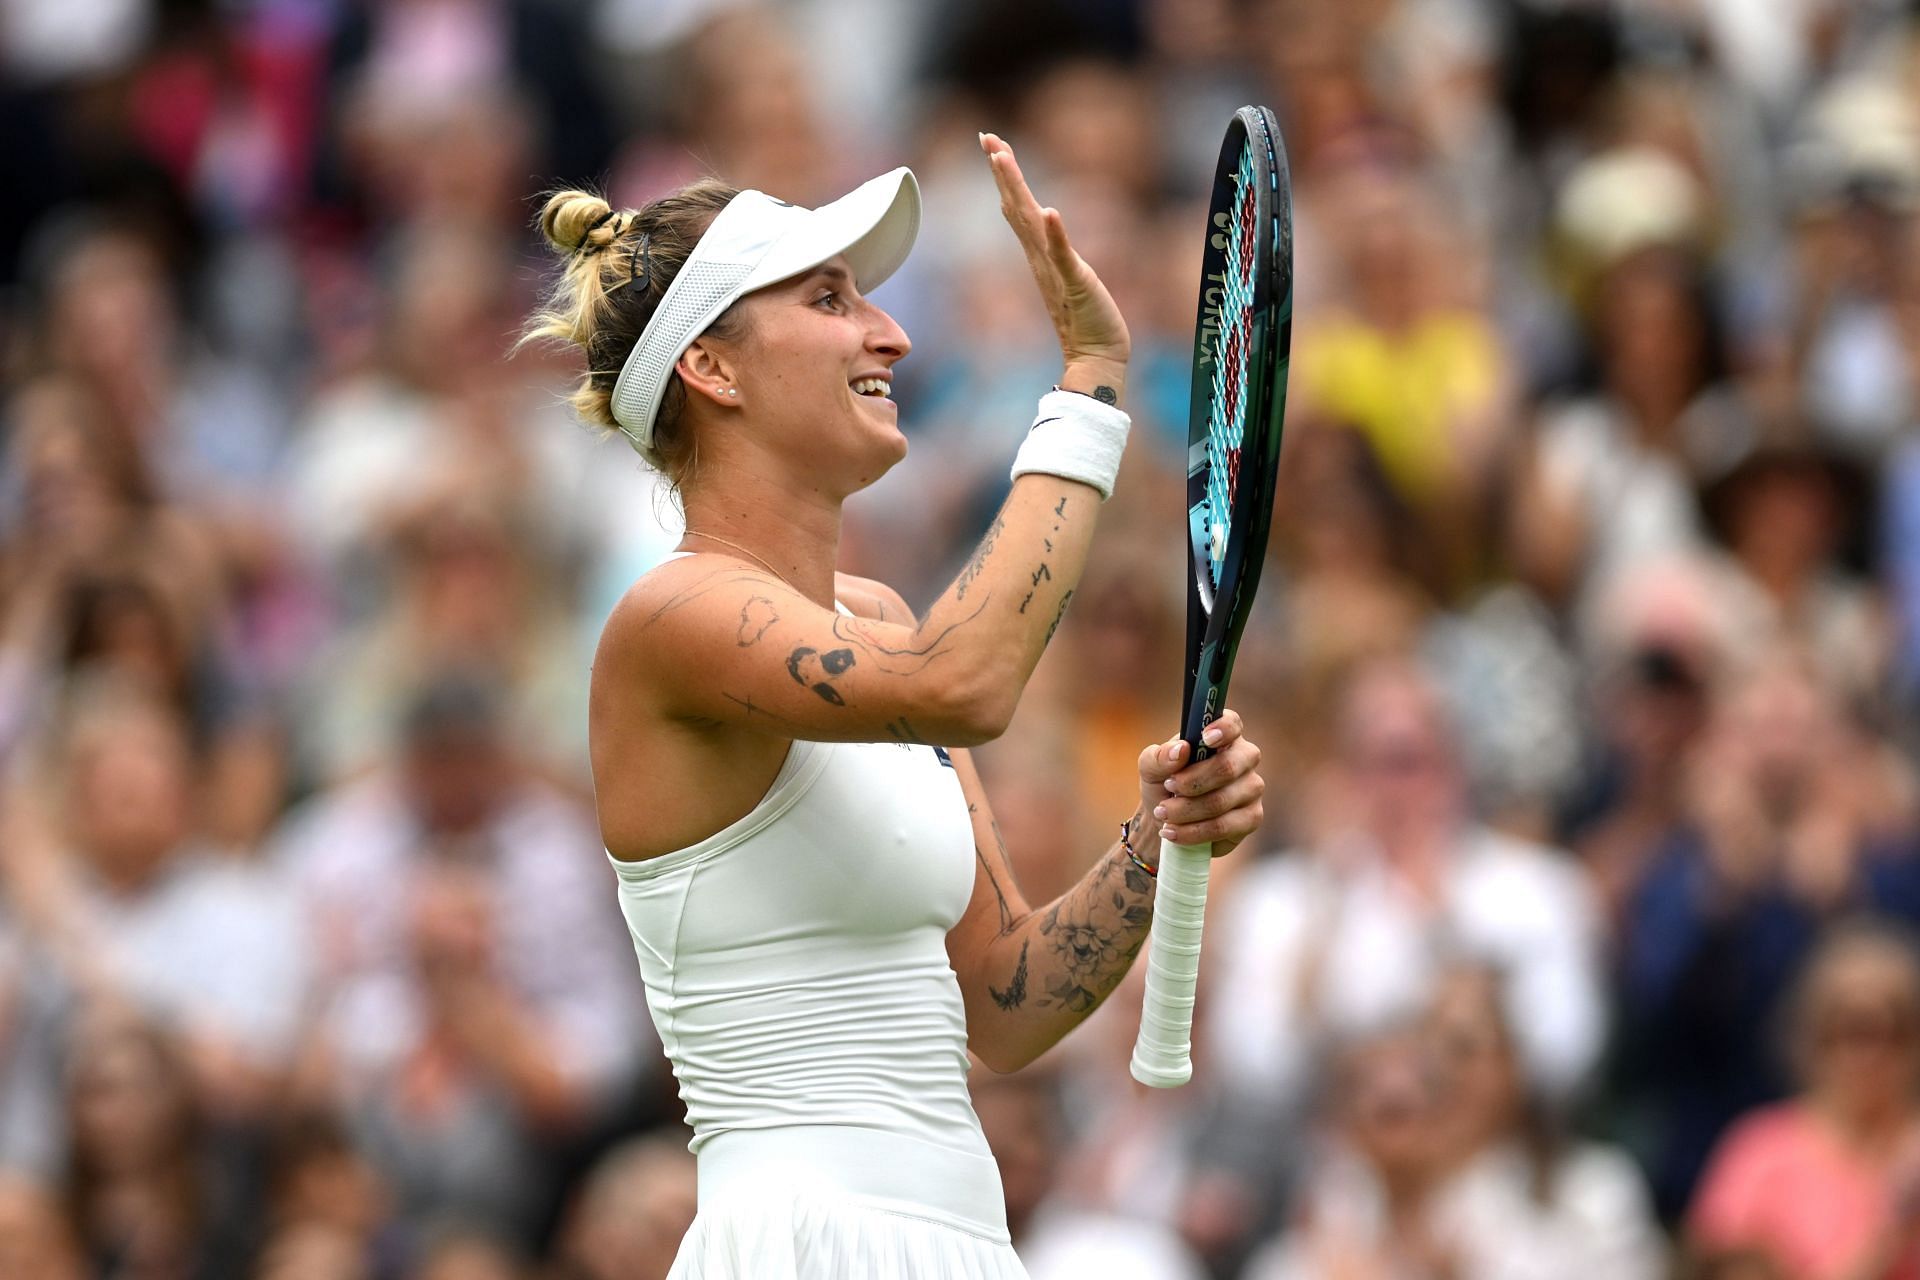 Ons Jabeur vs Marketa Vondrousova Where to watch, TV schedule, live streaming details and more Wimbledon 2023, Final